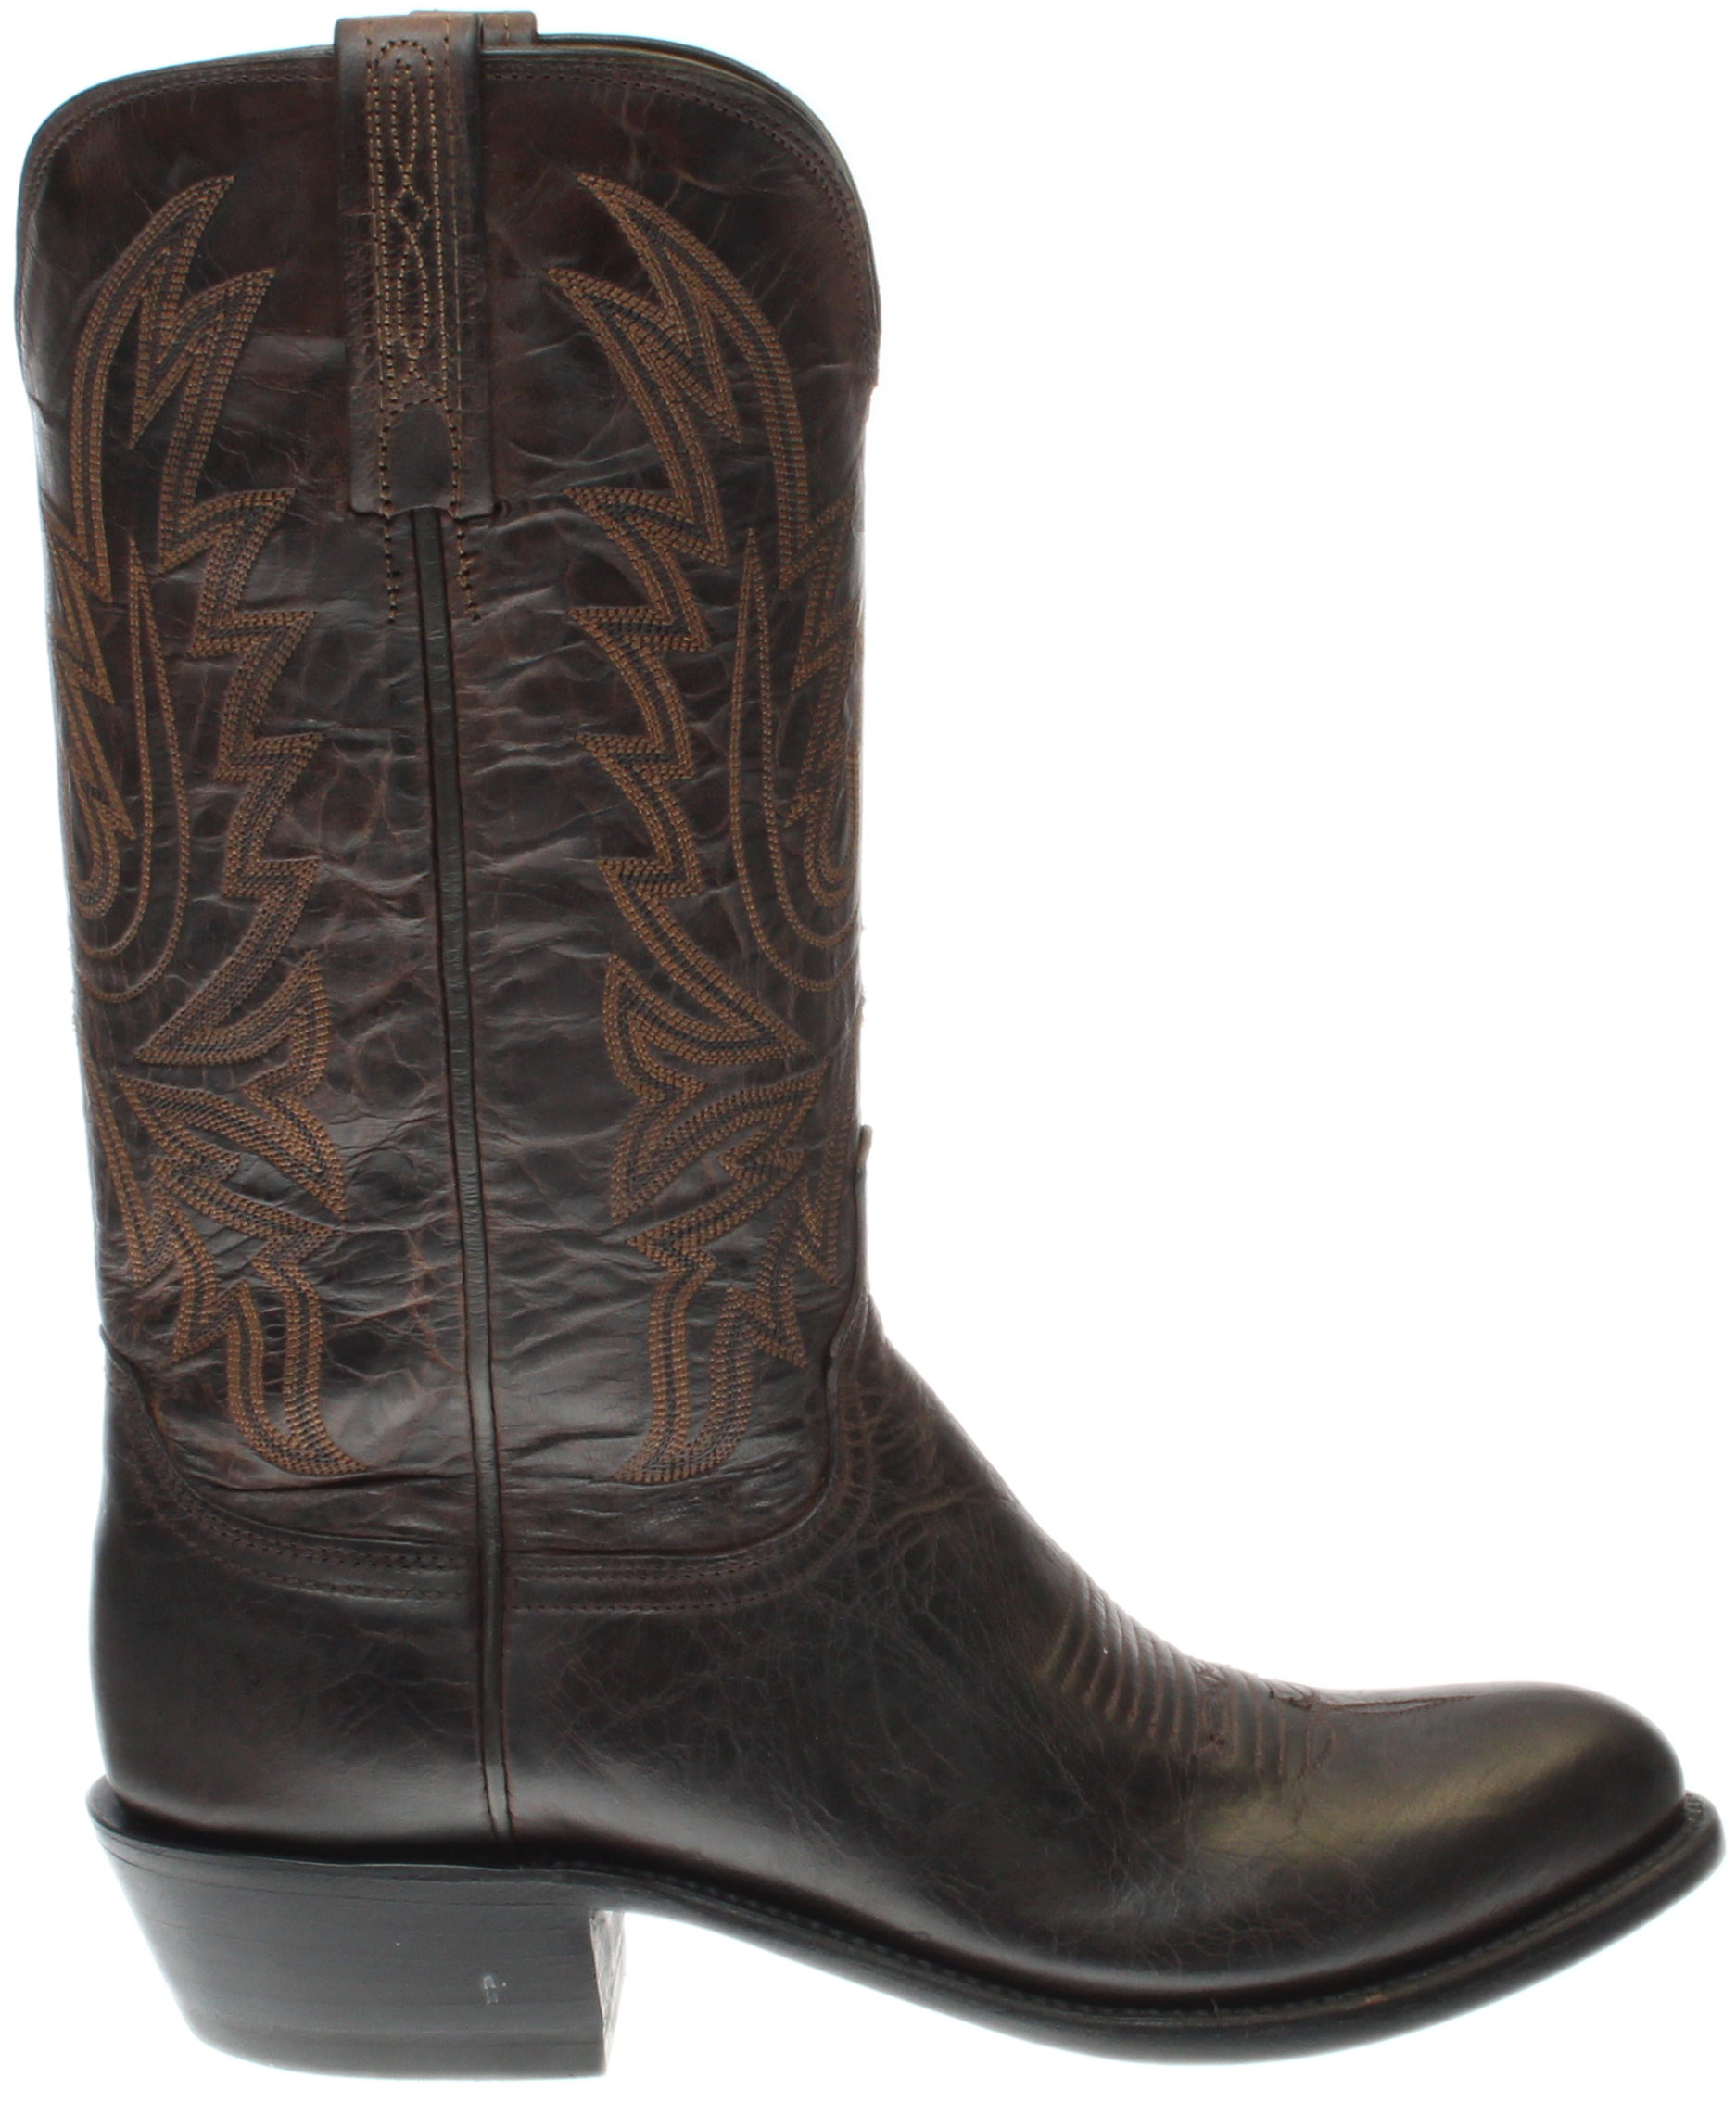 Lucchese Corbin Mad Dog Goat Leather Boots